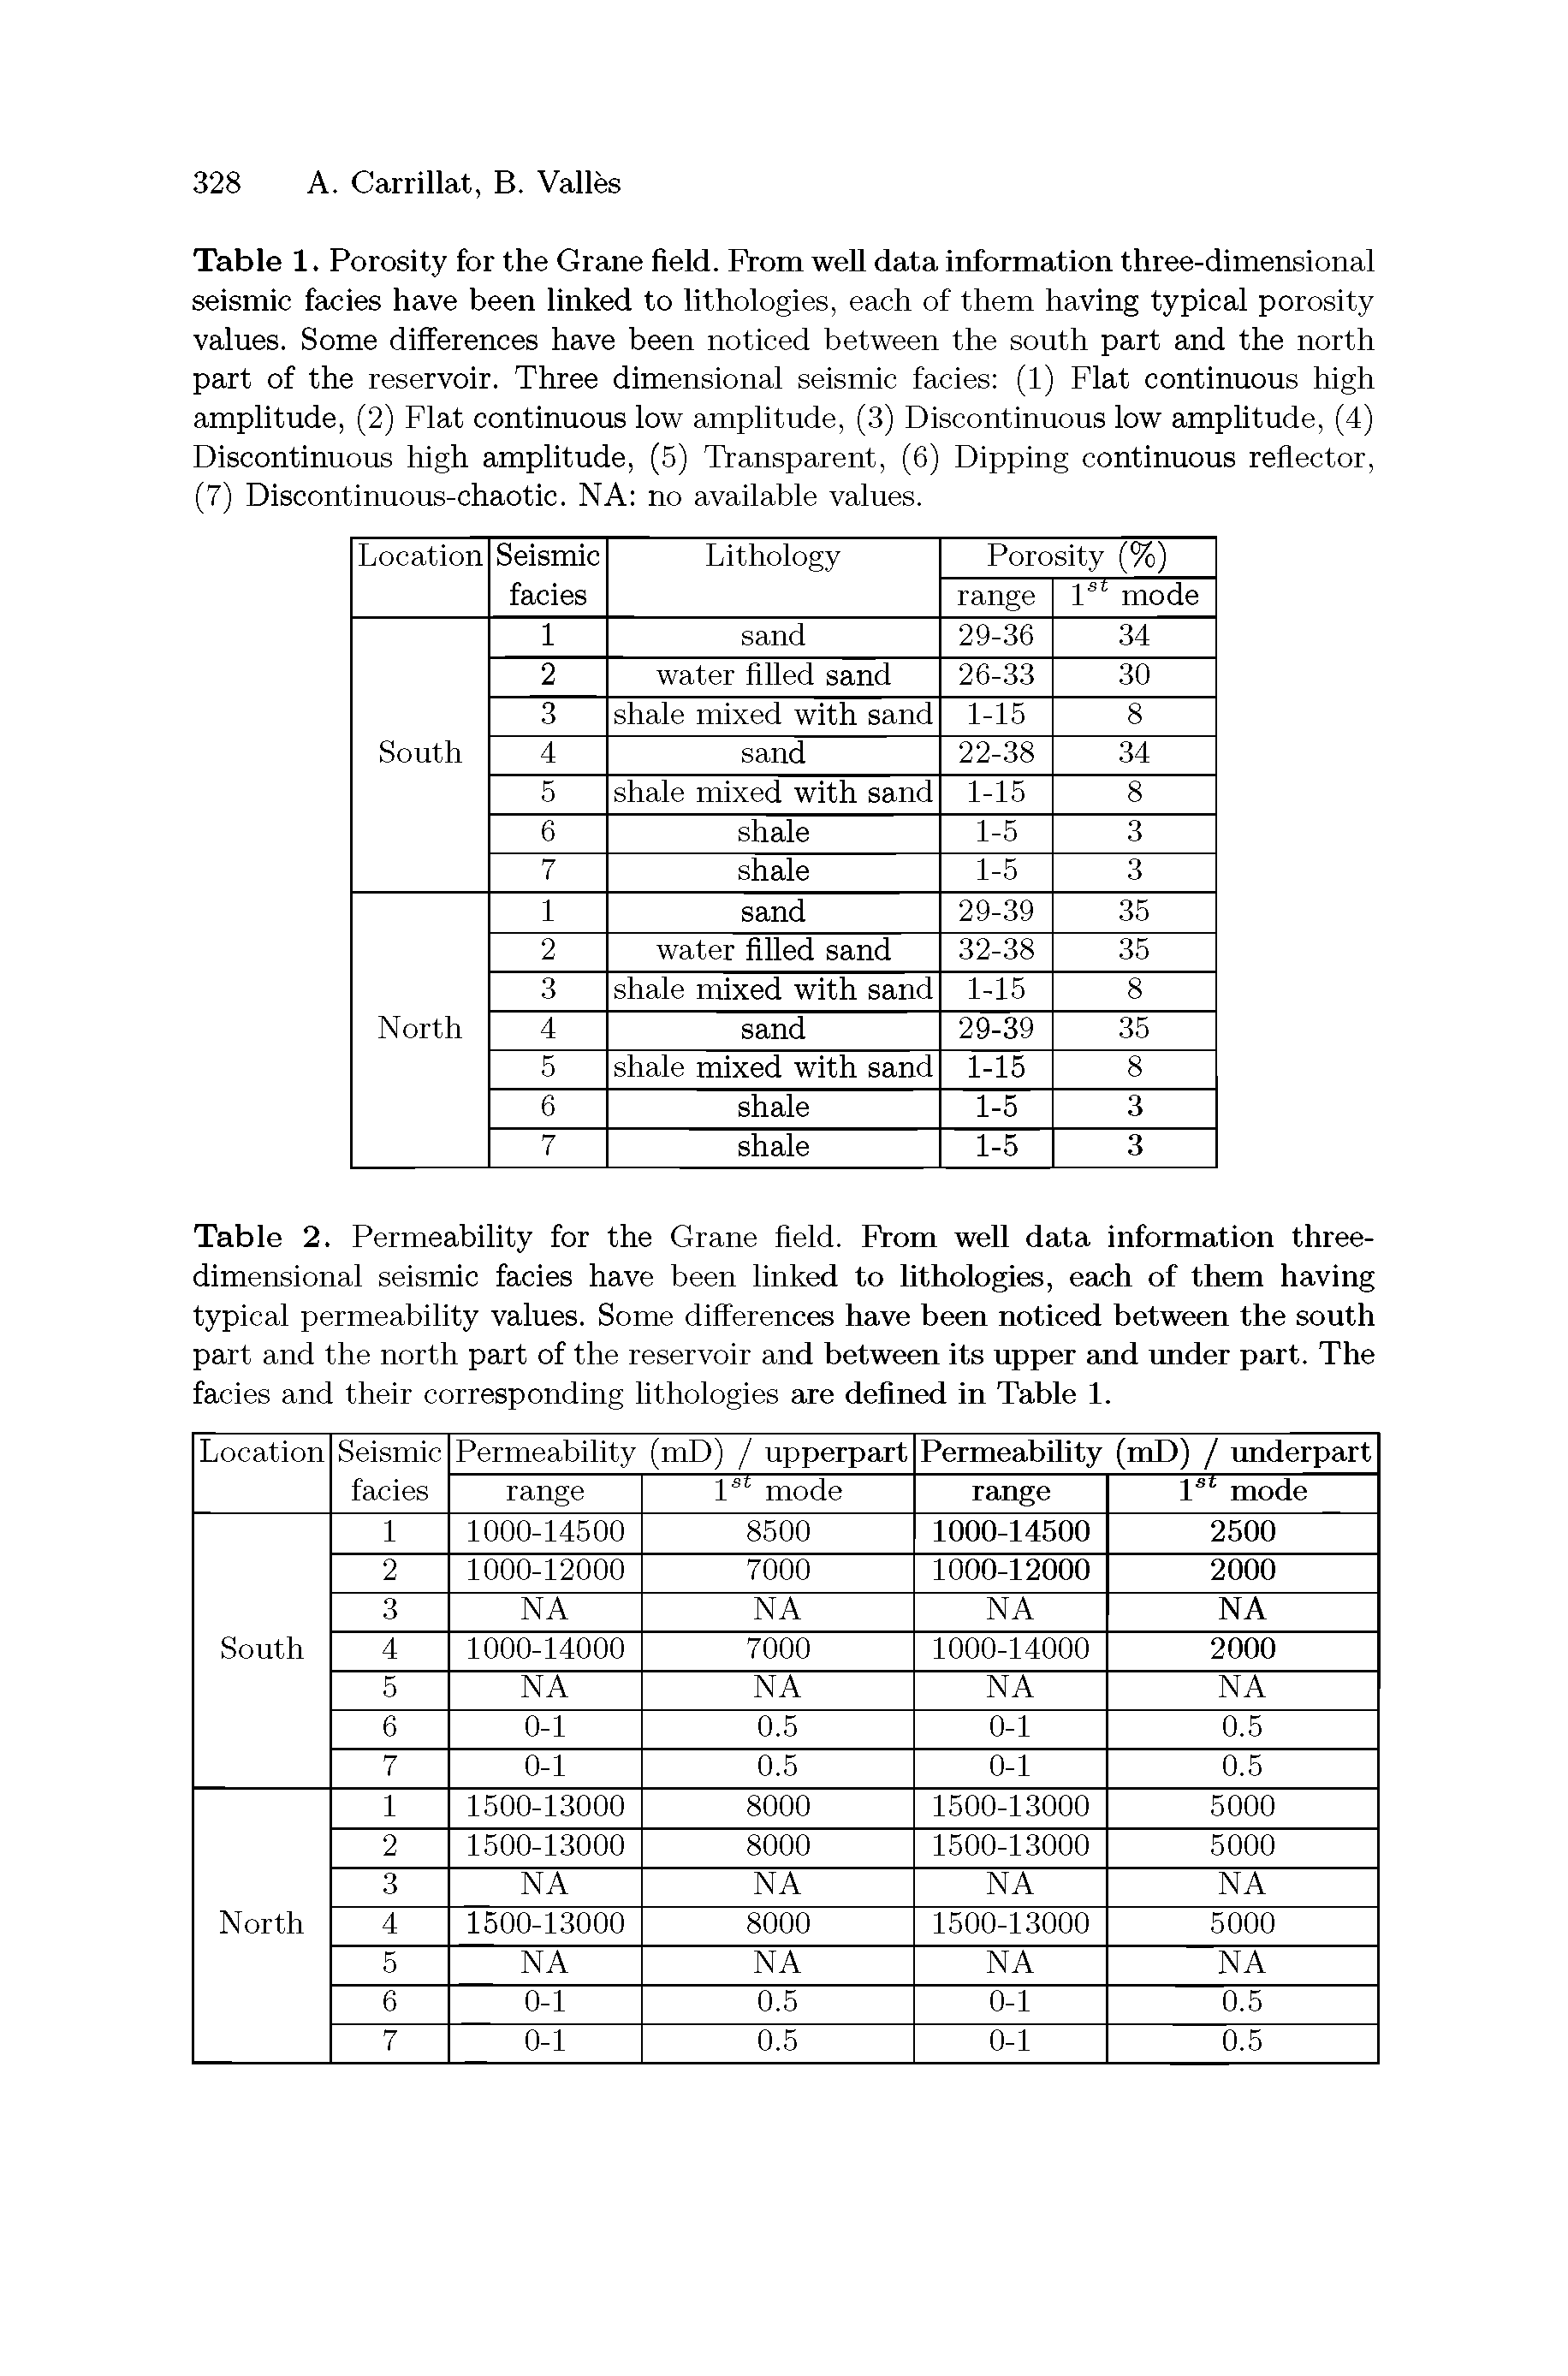 Table 1. Porosity for the Grane field. From weU data information three-dimensional seismic facies have been linked to lithologies, each of them having typical porosity values. Some differences have been noticed between the south part and the north part of the reservoir. Three dimensional seismic facies (1) Flat continuous high amplitude, (2) Flat continuous low amplitude, (3) Discontinuous low amplitude, (4) Discontinuous high amplitude, (5) Transparent, (6) Dipping continuous reflector, (7) Discontinuous-chaotic. NA no available values.